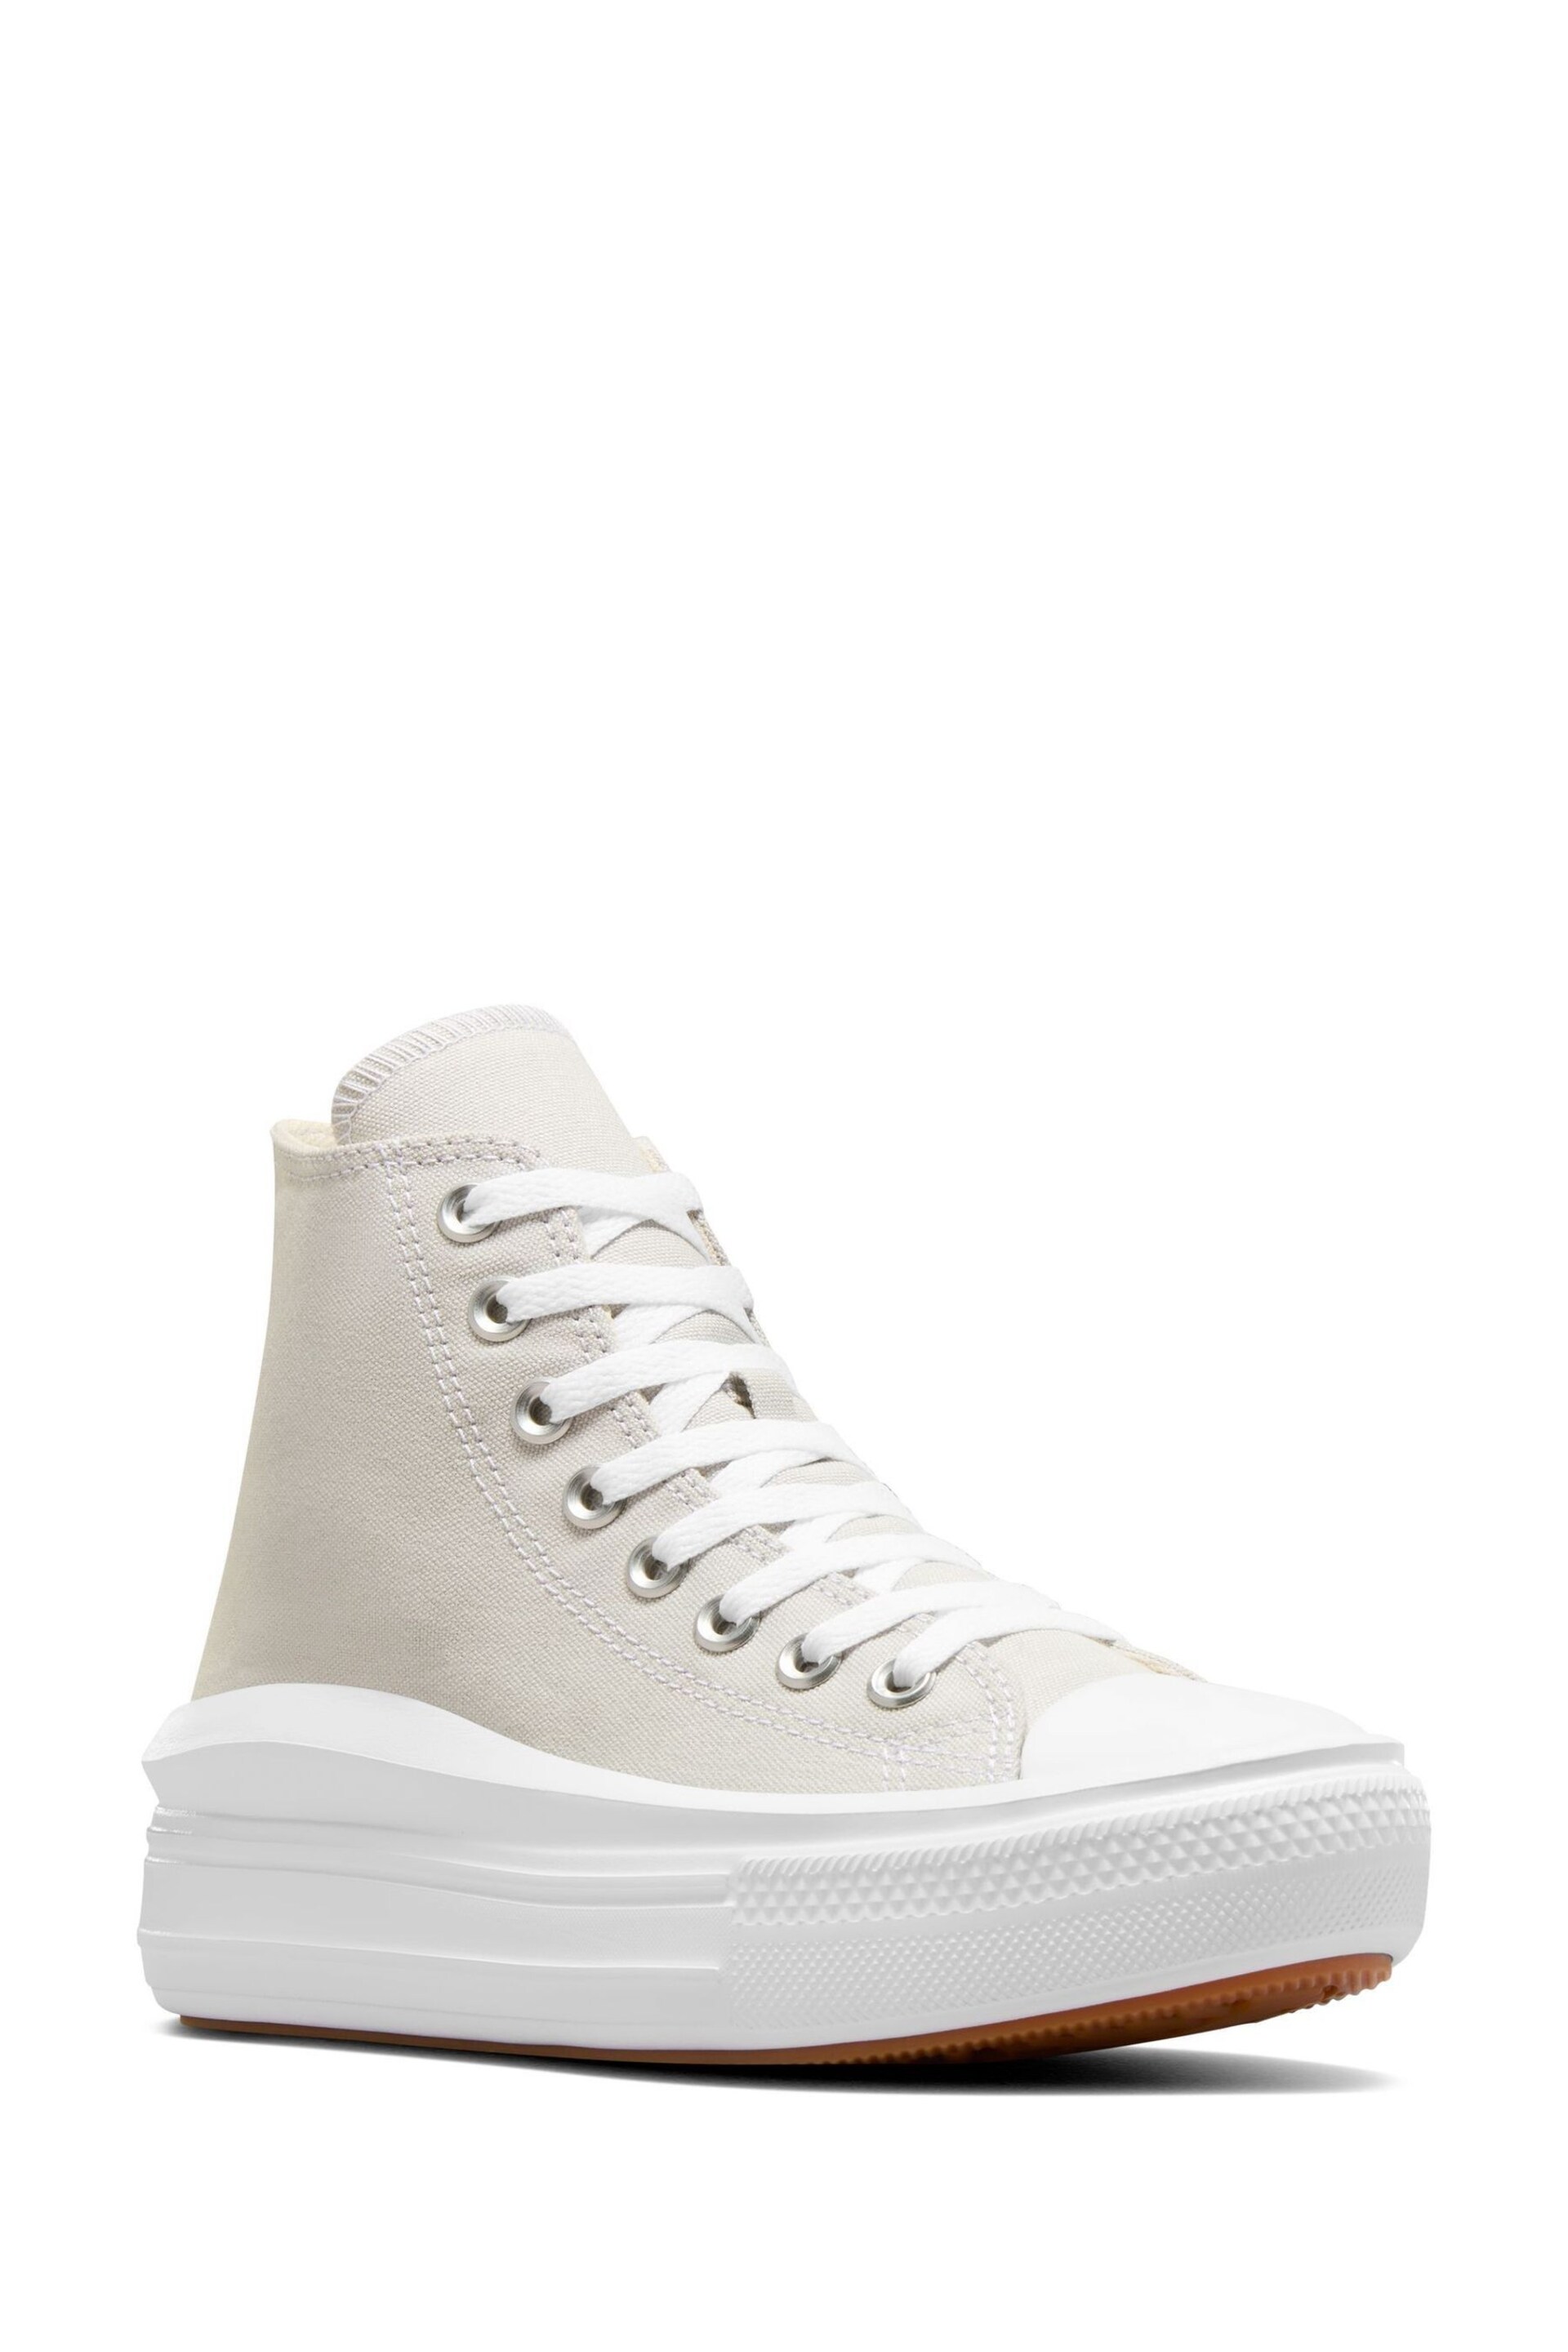 Converse Grey Chuck Taylor All Star Move High Top Trainers - Image 3 of 10